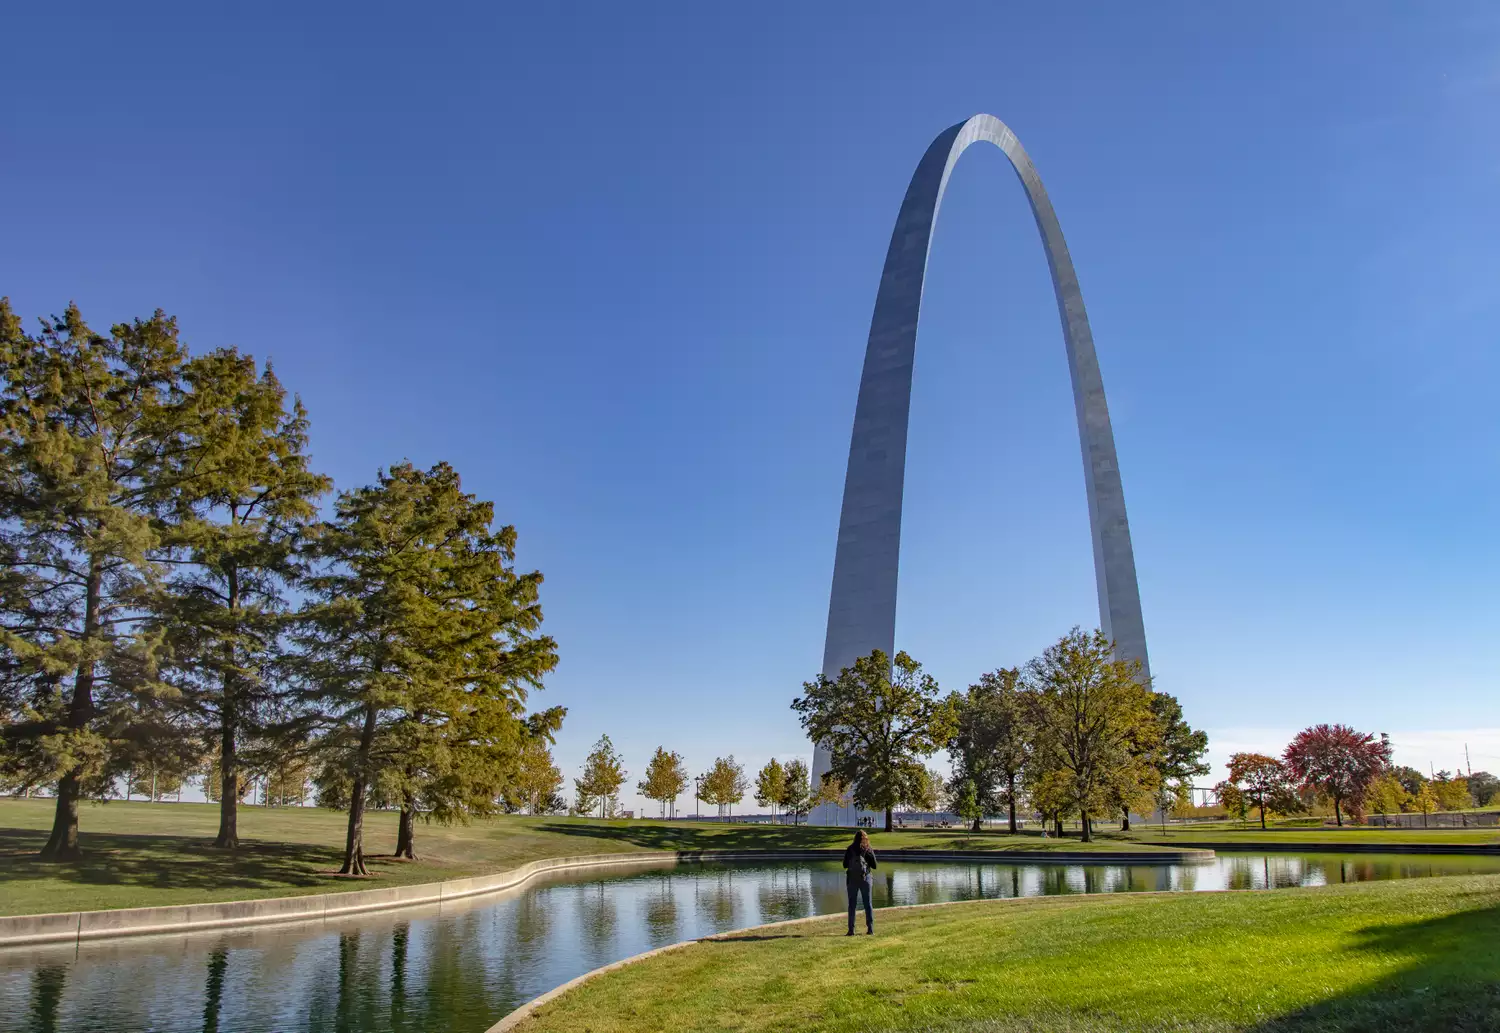 The Complete Guide to Gateway Arch National Park